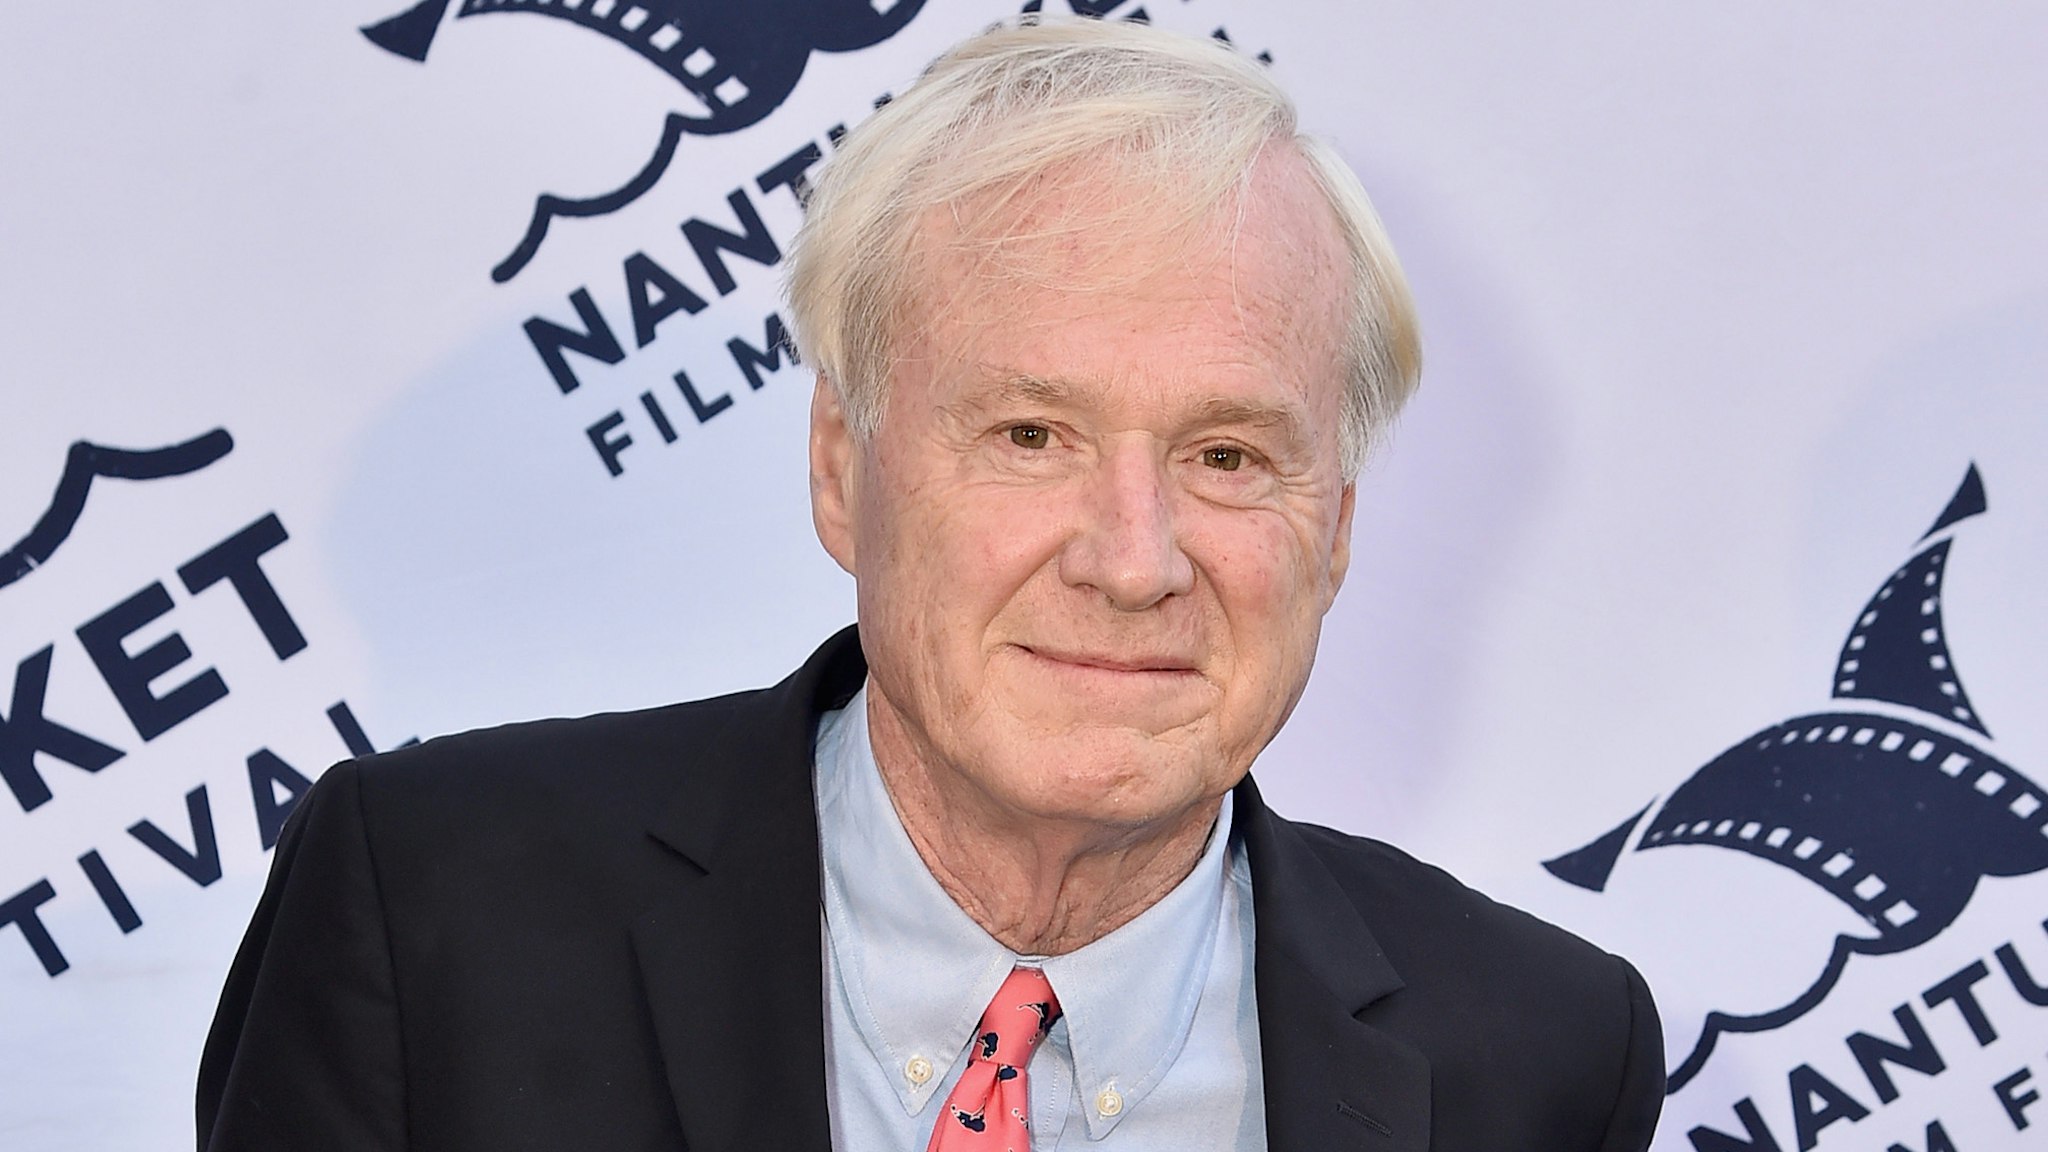 NANTUCKET, MA - JUNE 23: Talk show host Chris Matthews attends the Screenwriters Tribute during the 2017 Nantucket Film Festival - Day 3 on June 23, 2017 in Nantucket, Massachusetts.